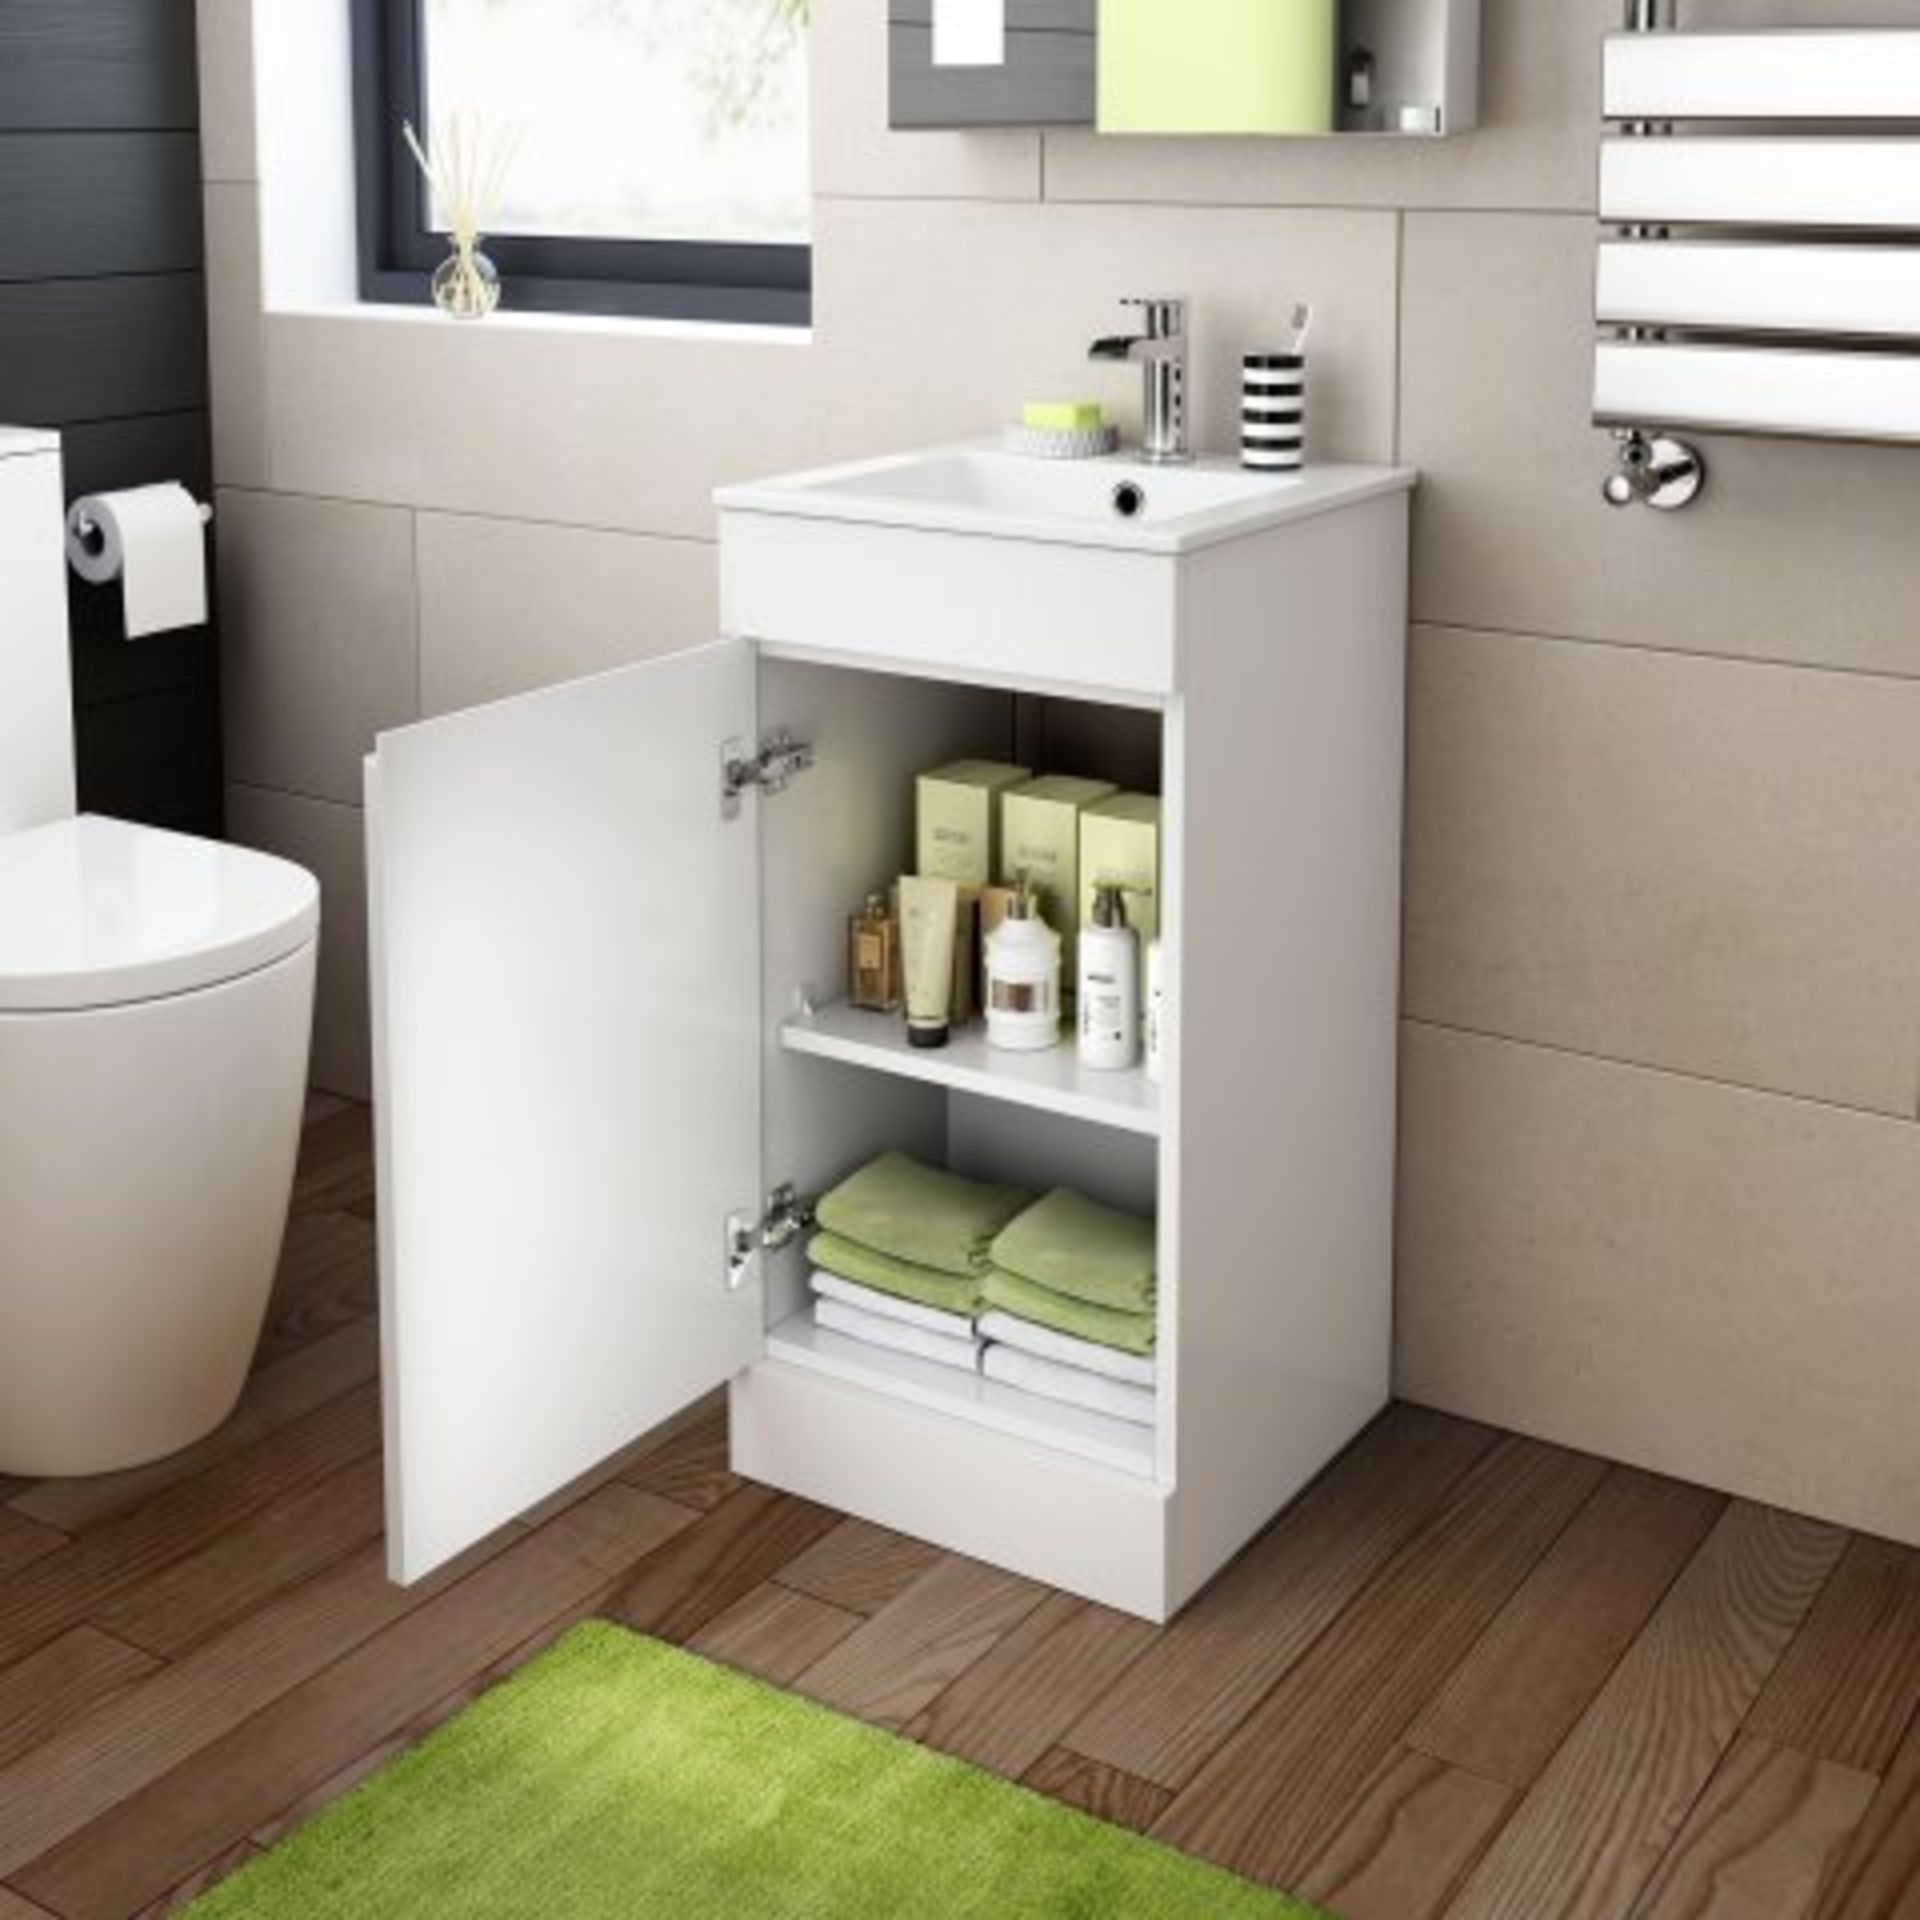 (REF34) 400mm Trent High Gloss White Basin Cabinet - Floor Standing. RRP £234.99. WITH BASIN This - Image 3 of 3